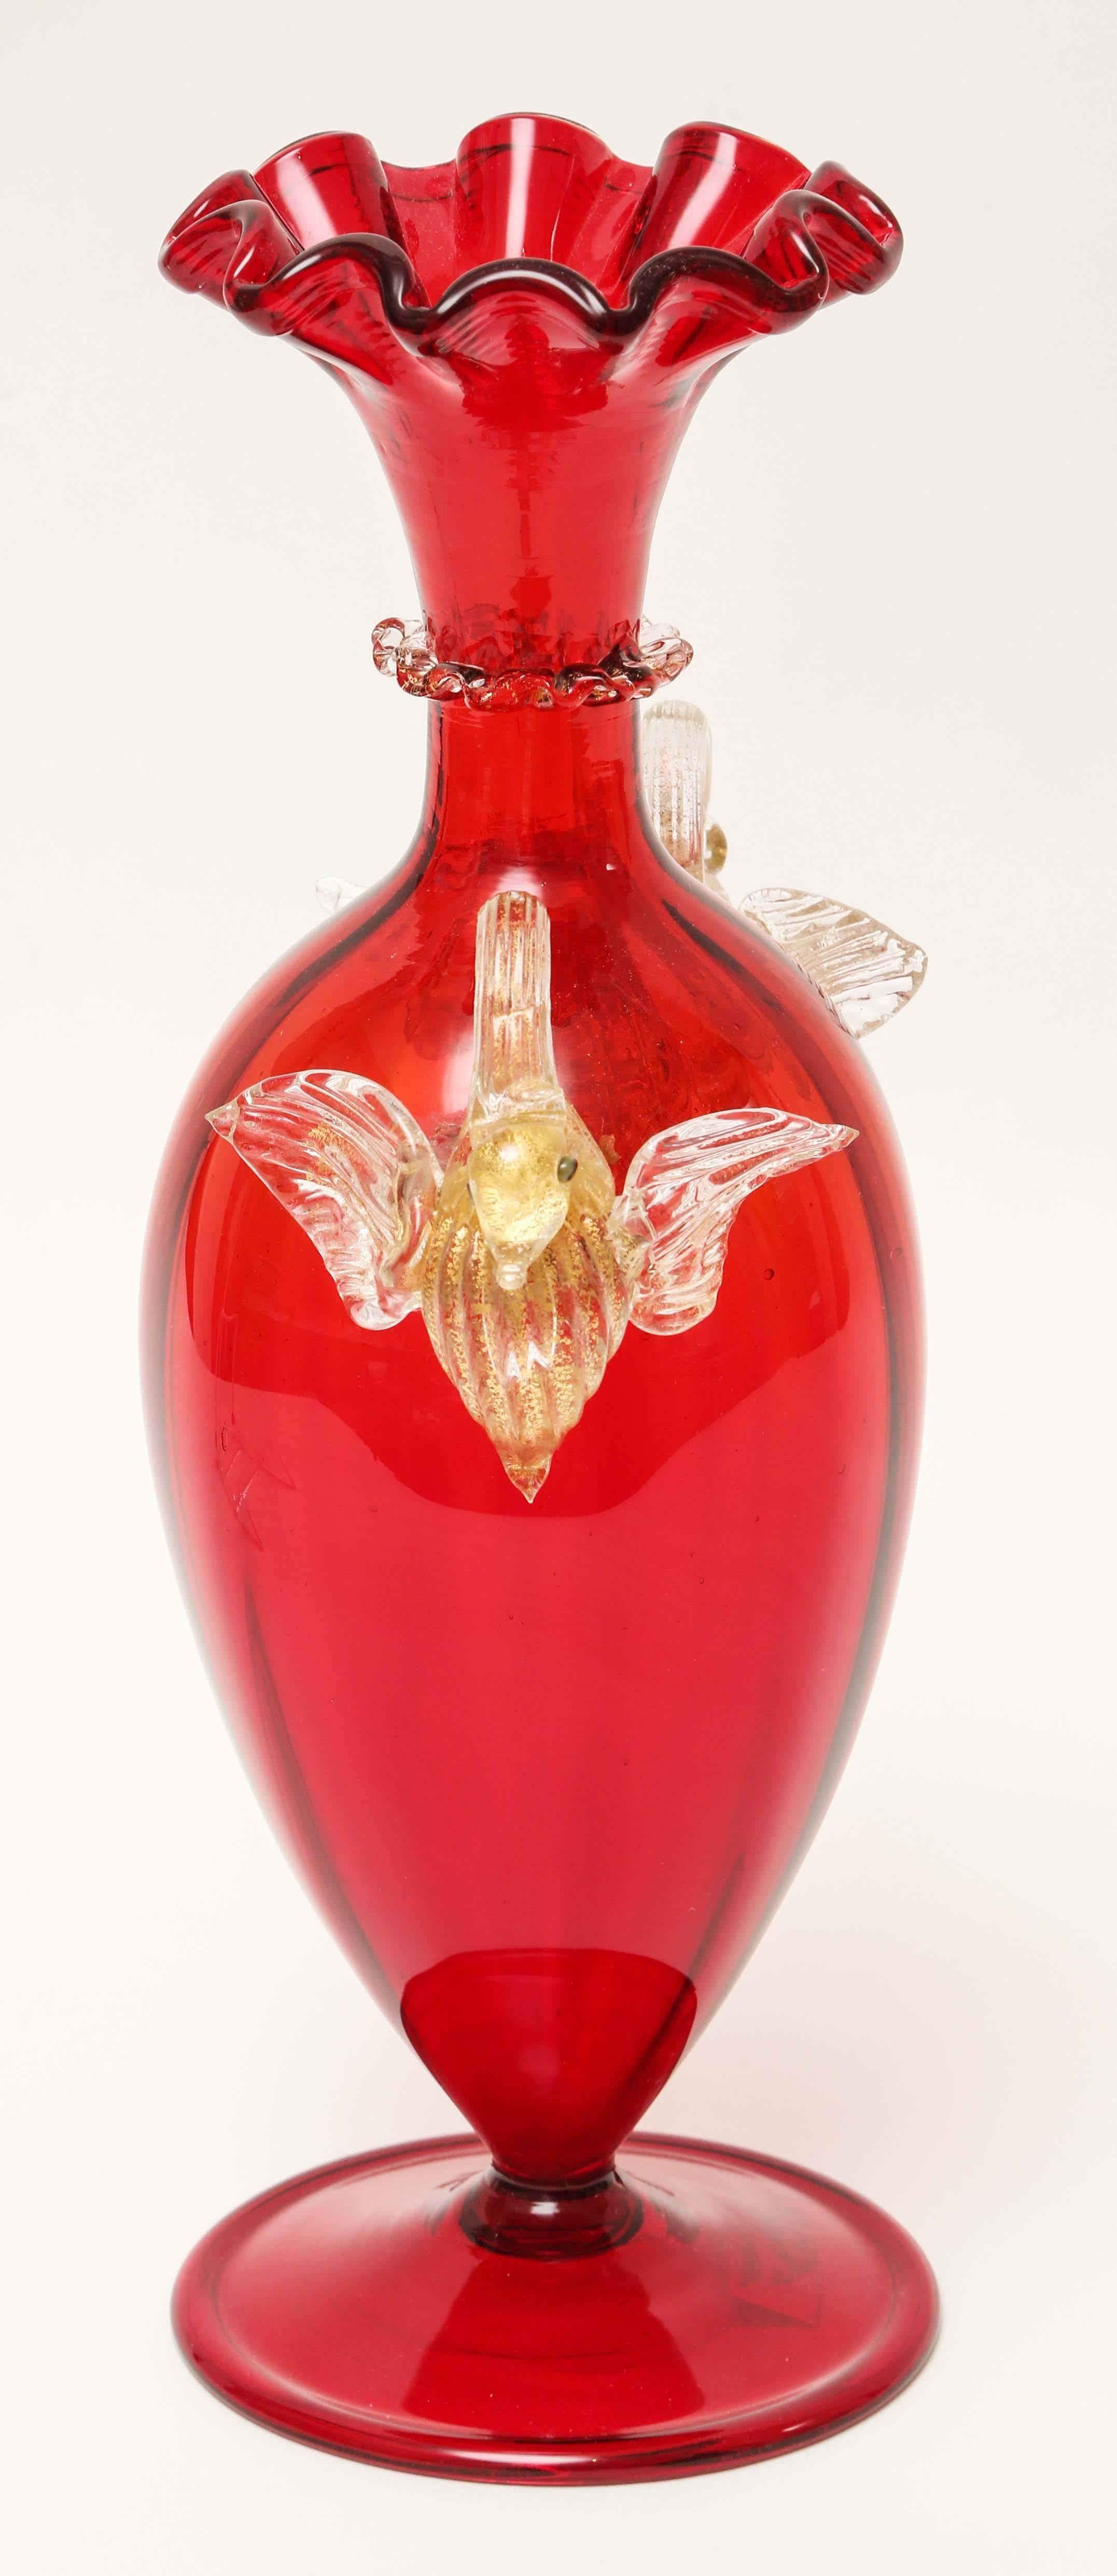 A charming vintage Venetian vase with a nicely blown ruffle edge to its top and extra blown decoration on its collar. Two elegant swan handles and blown 24-karat gold inclusion throughout the clear accents. From the great master glass blowers on the